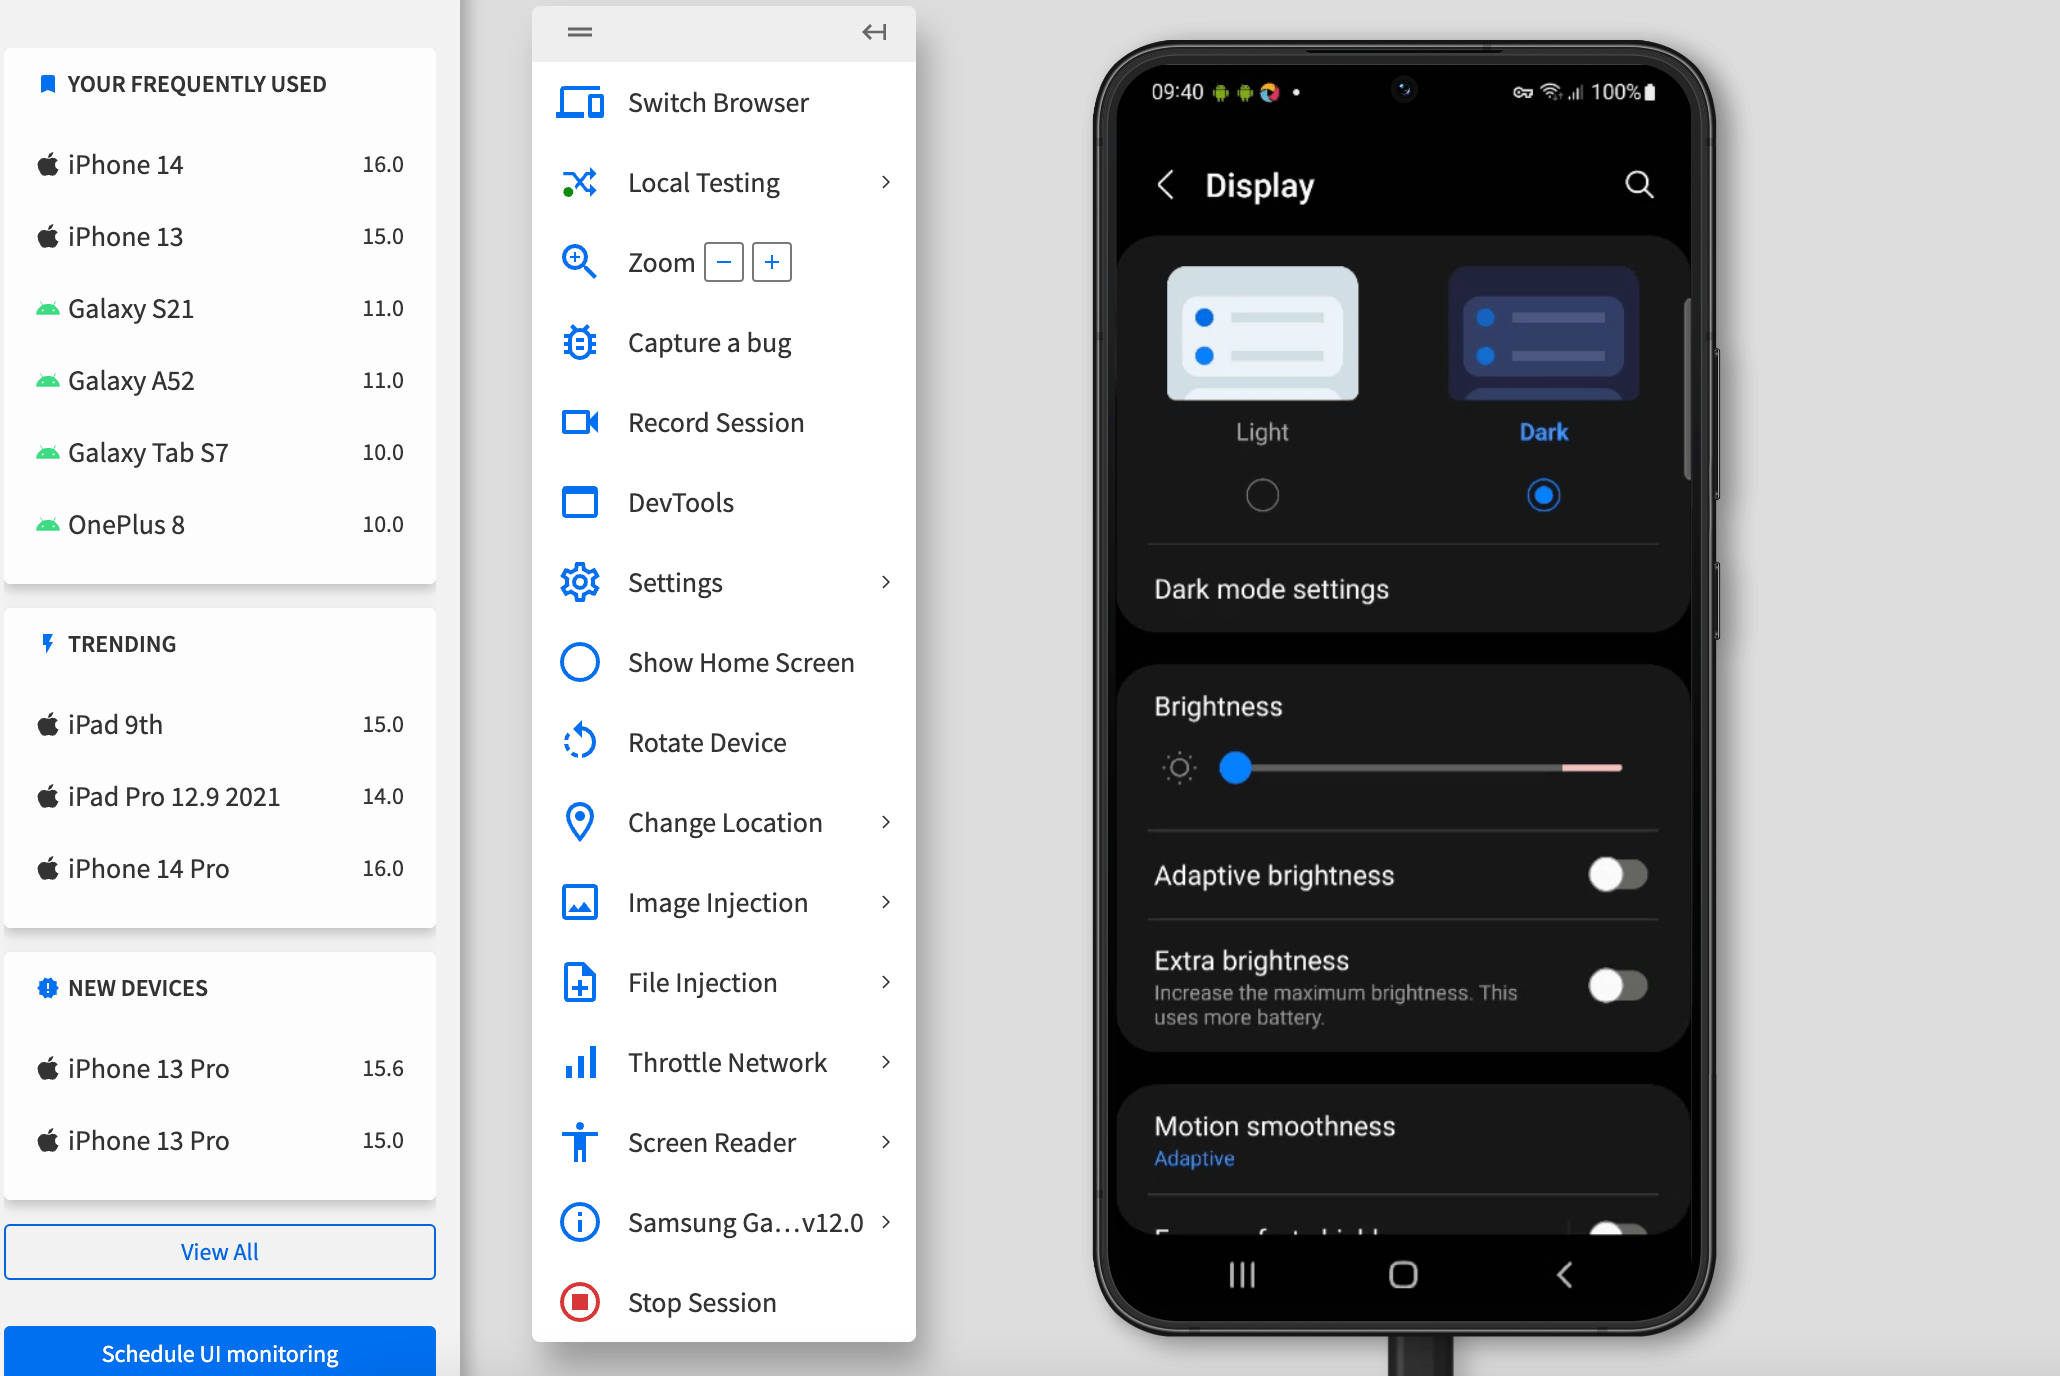 Enable Dark Mode on Android